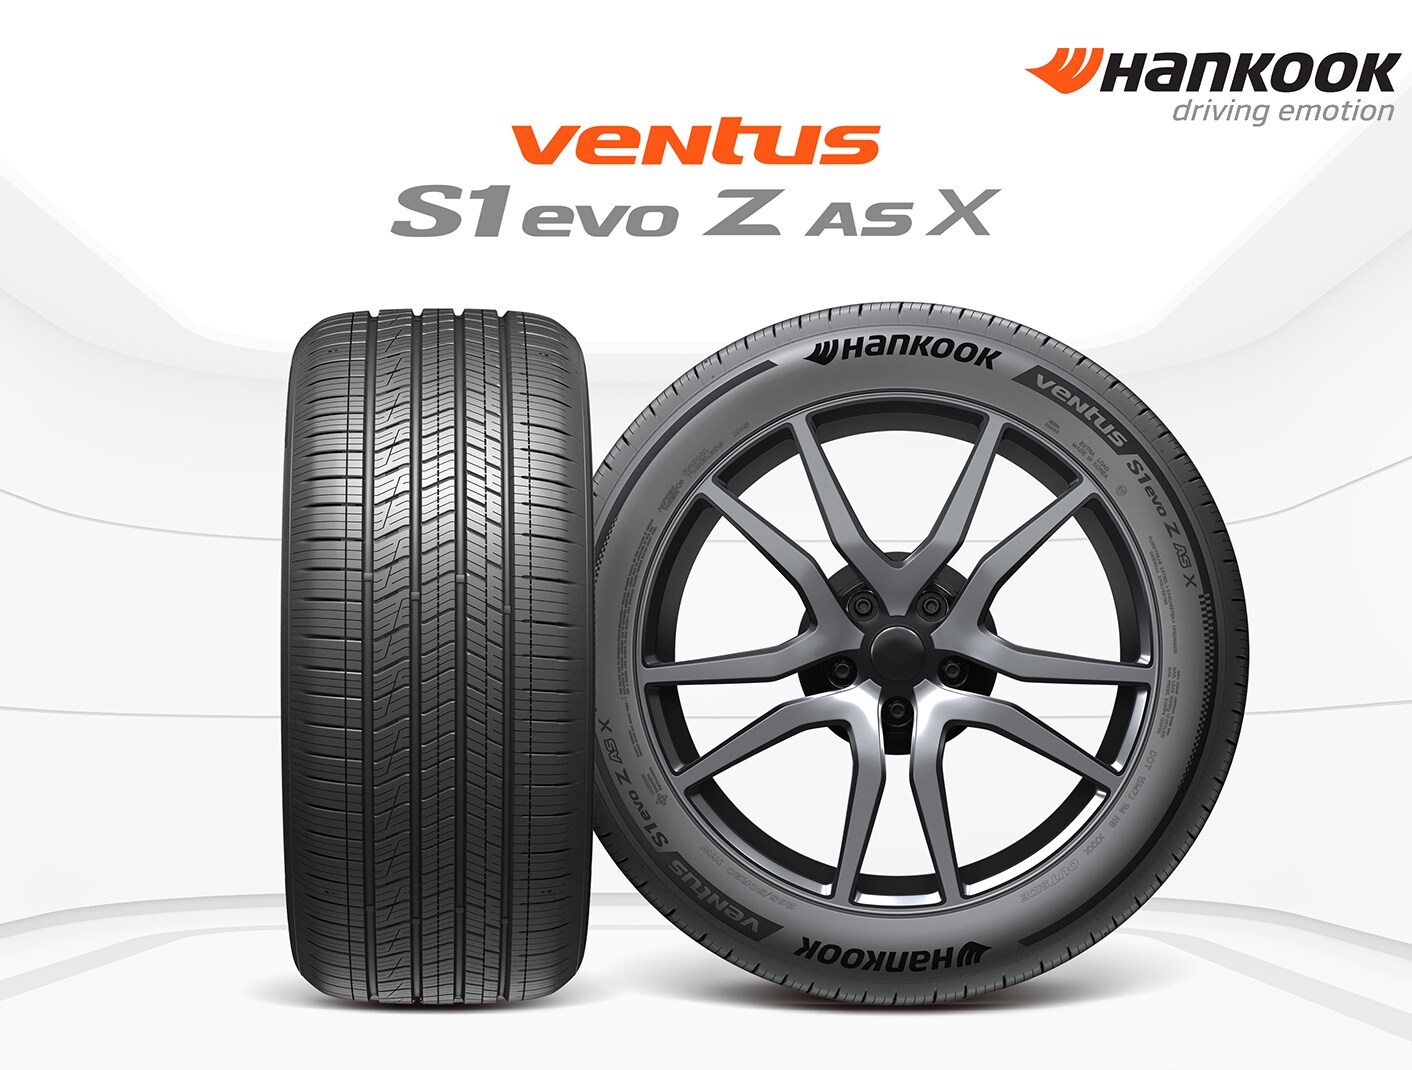 Hankook Tire Launches Ultra-High-Performance All-Season Tire for SUVs